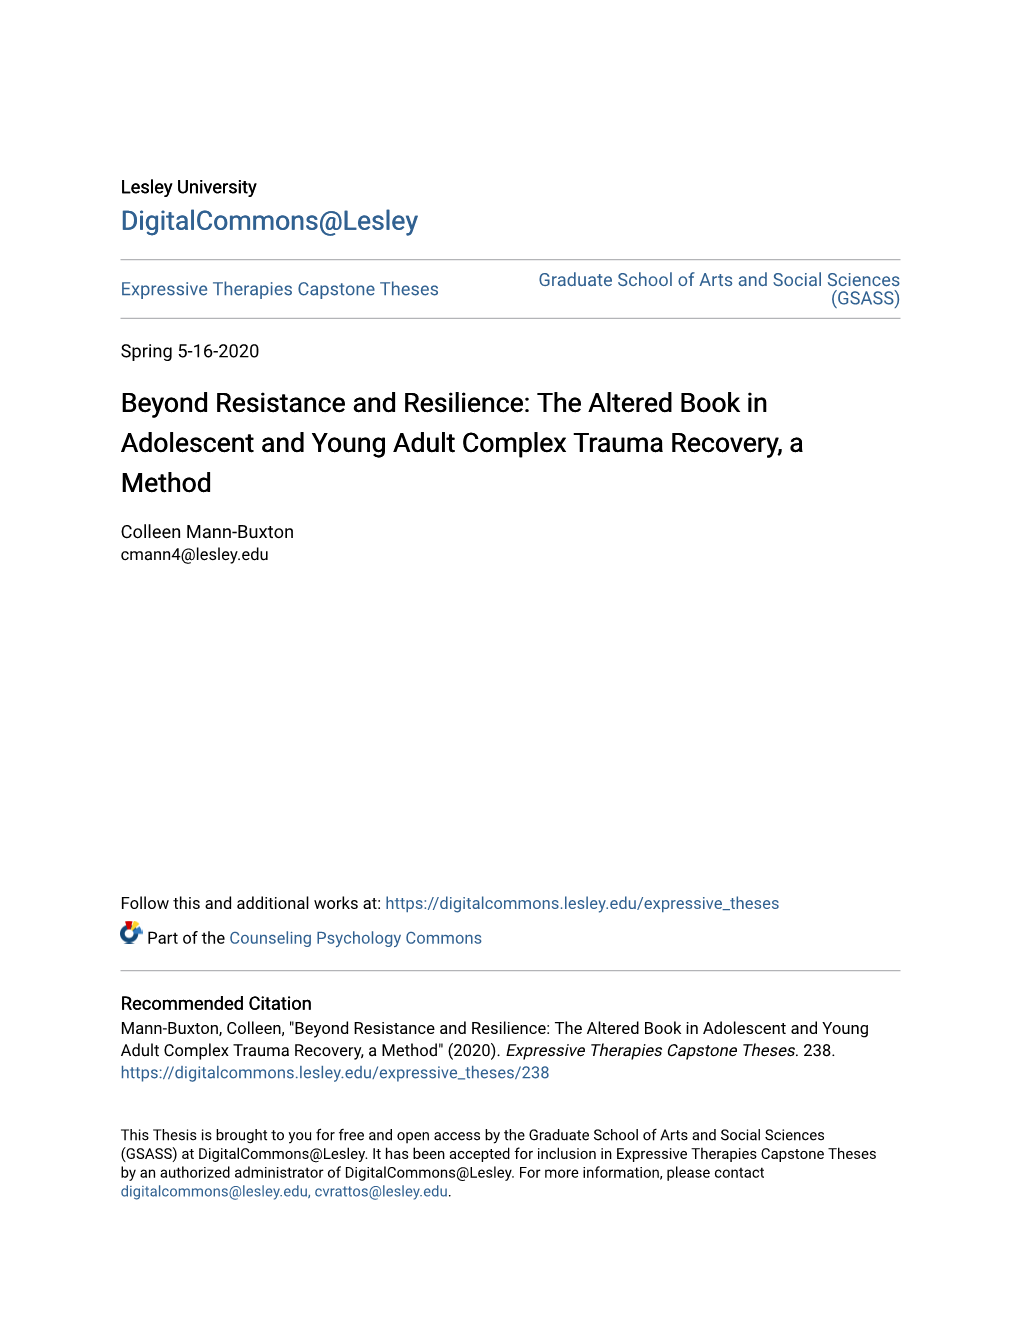 The Altered Book in Adolescent and Young Adult Complex Trauma Recovery, a Method